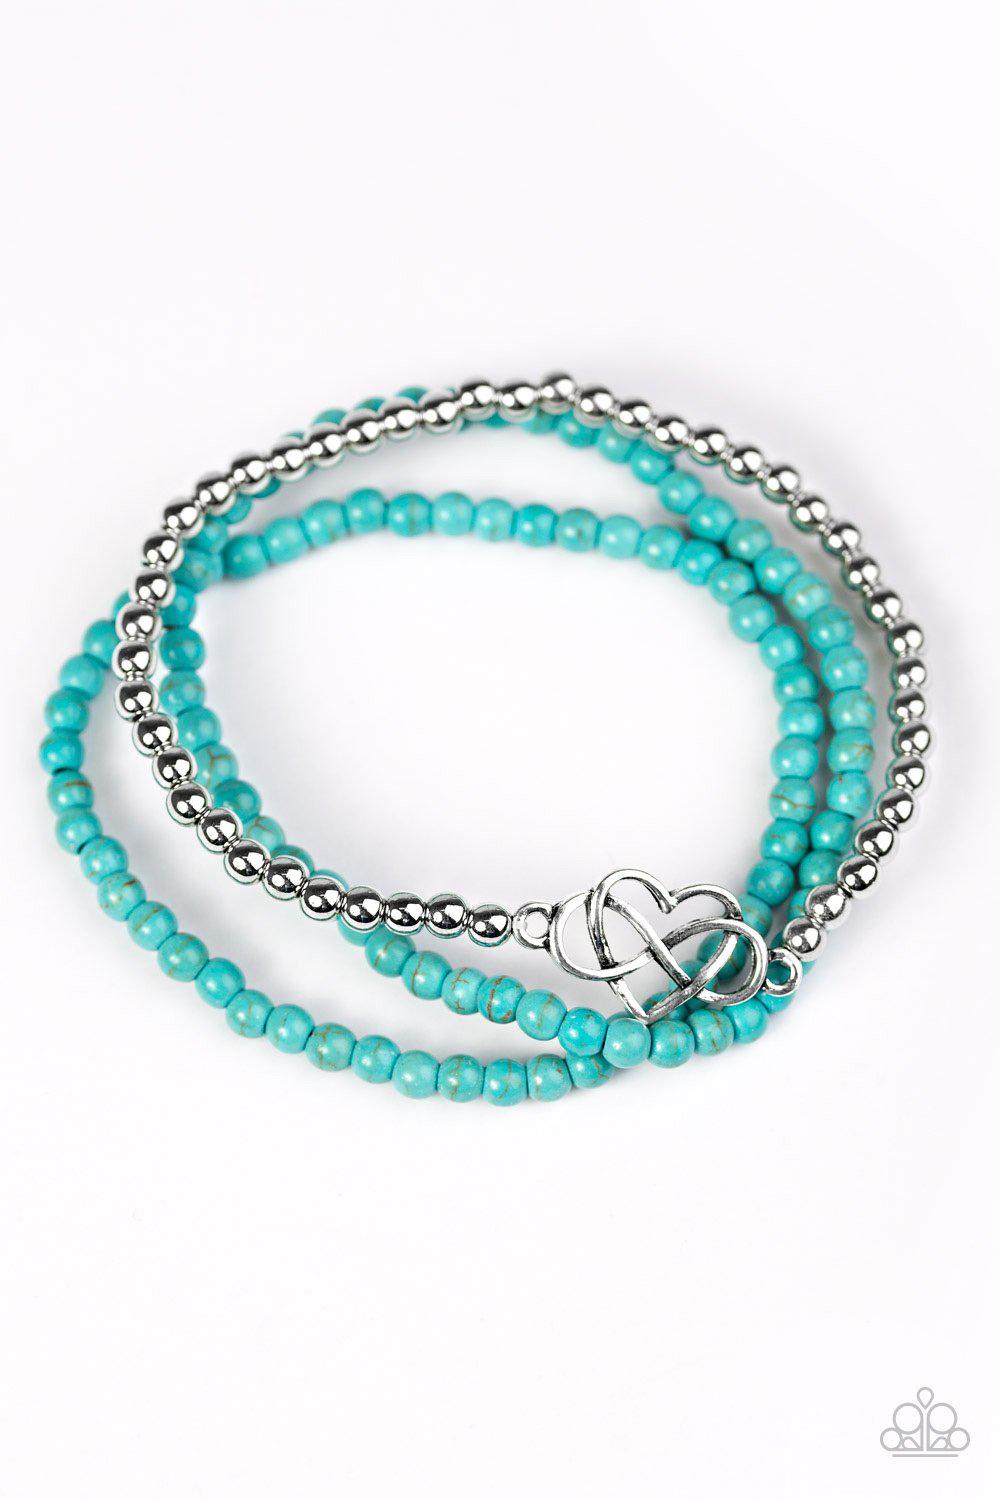 Collect Moments Blue and Silver Heart Bracelet Set - Paparazzi Accessories- lightbox - CarasShop.com - $5 Jewelry by Cara Jewels